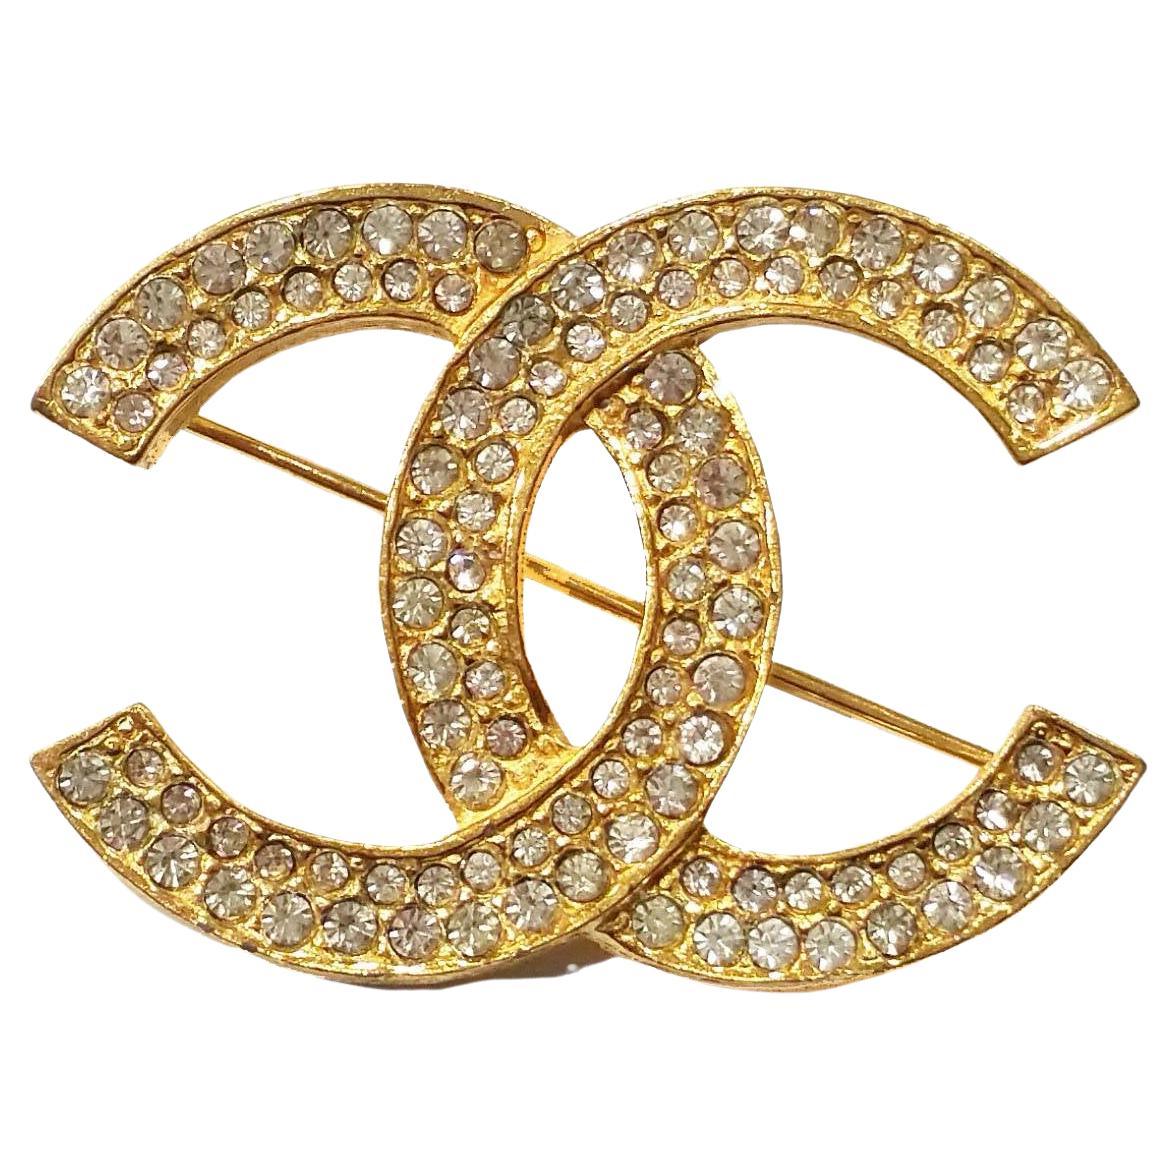 Chanel Vintage Classic Gold Plated CC Silver Crystal Brooch